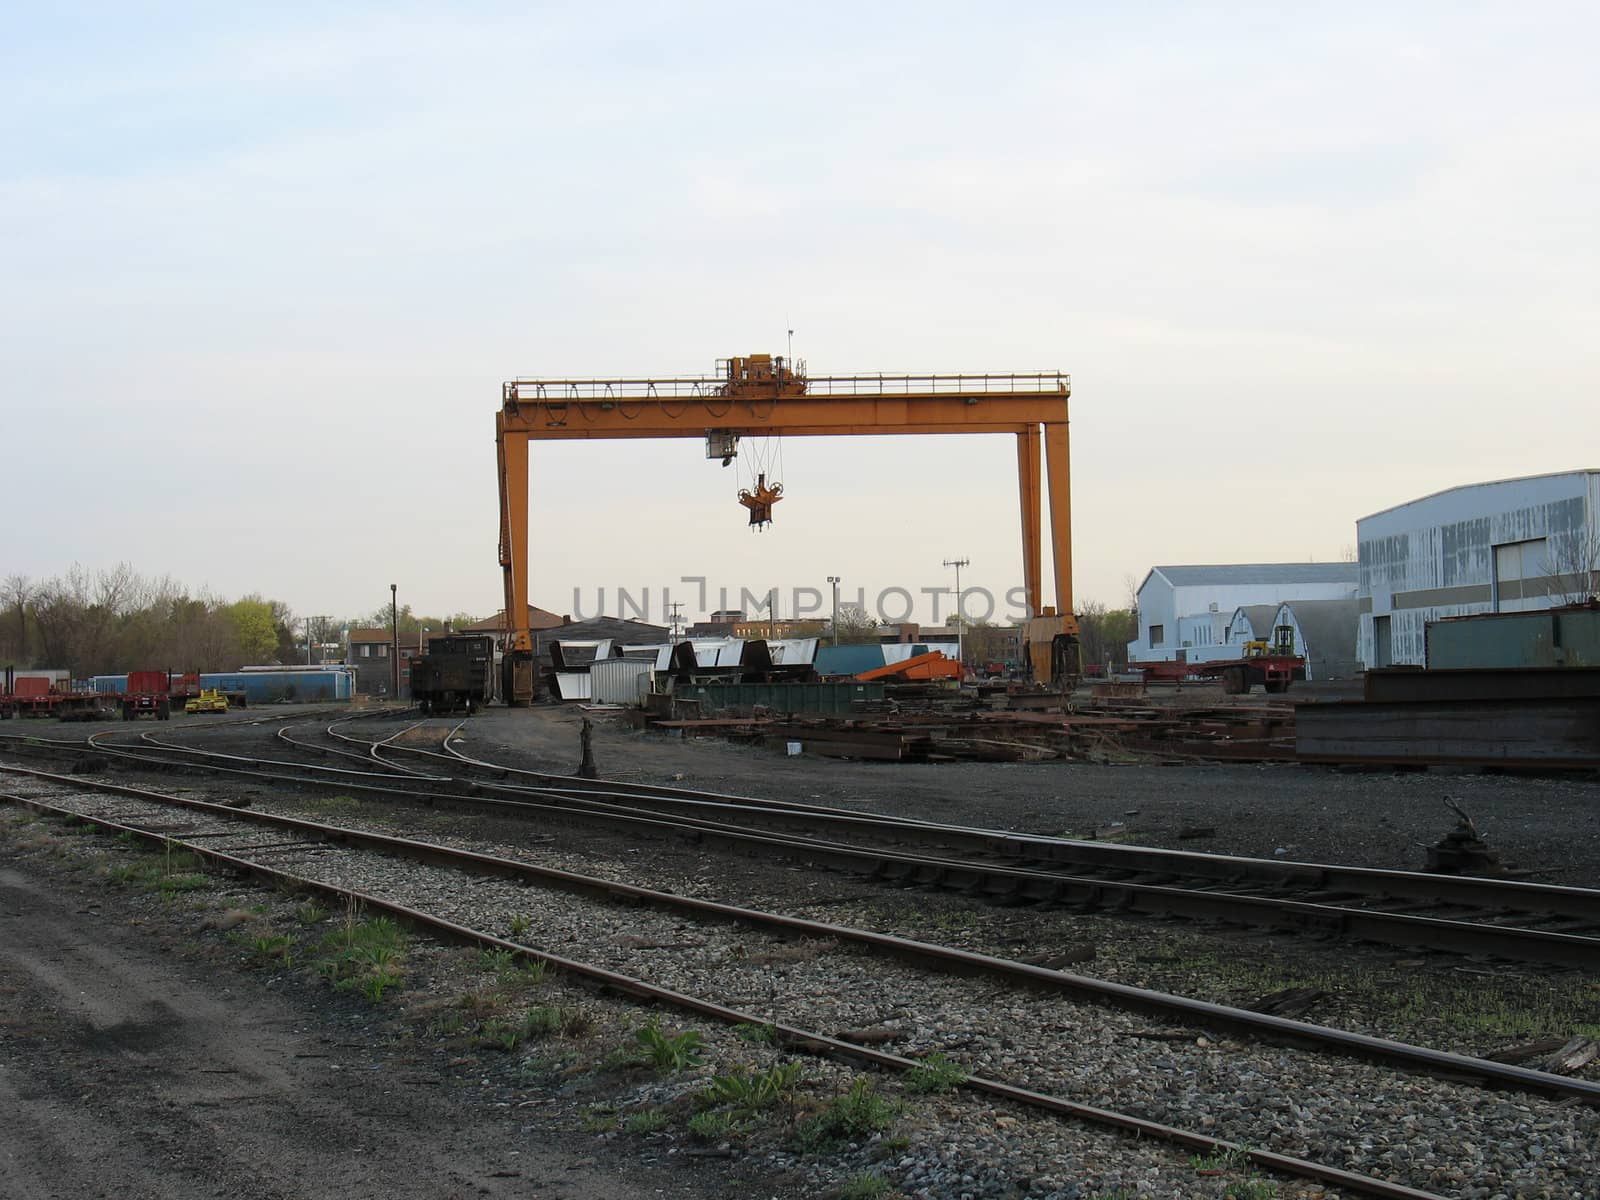 at the railroad station - cargo loading & unloading area